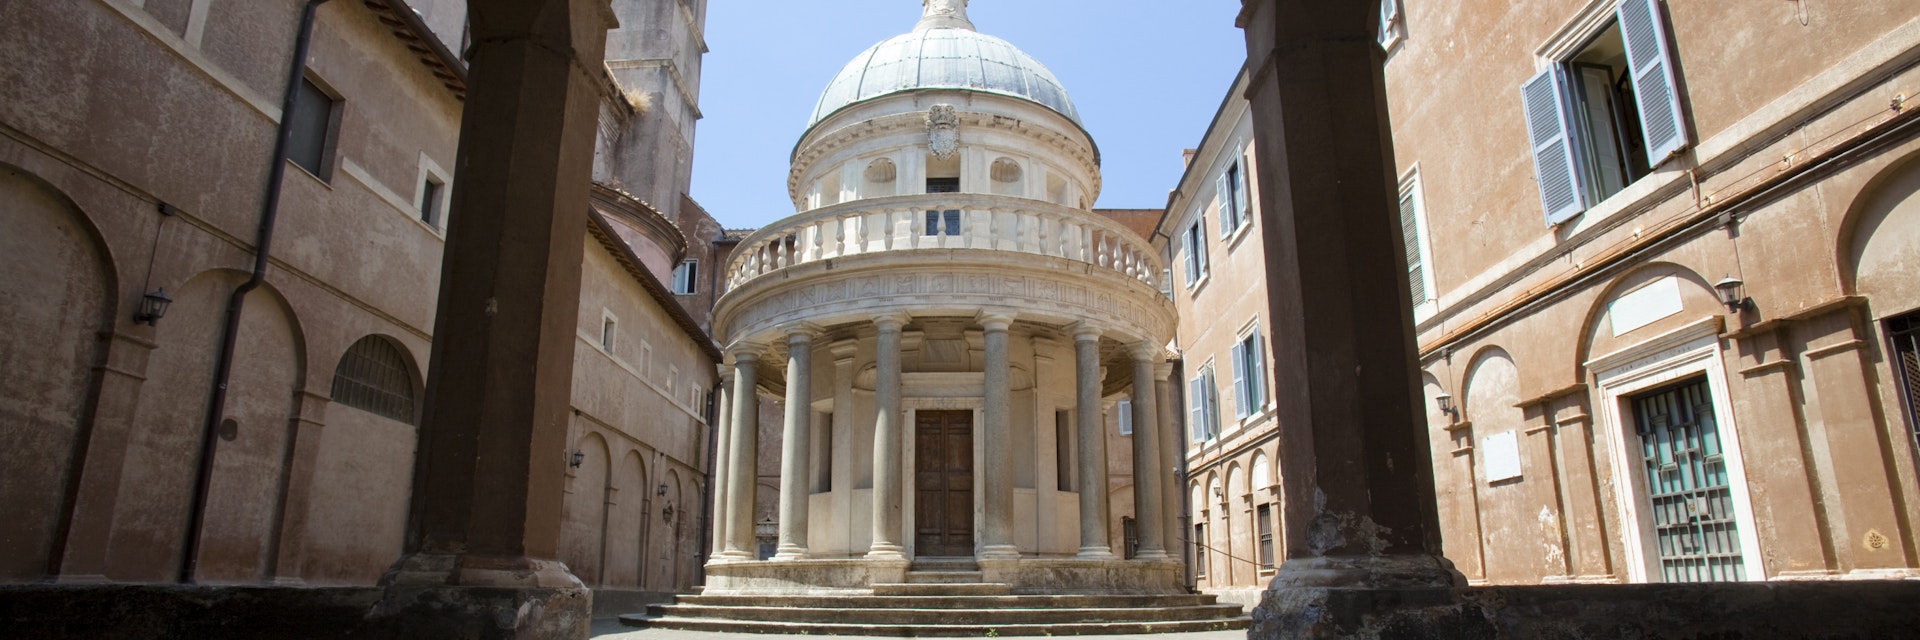 Tempietto (Small Temple) in the courtyard of San Pietro in Montorio, marking the traditional site of St. Peter's martyrdom, Janiculum Hill.